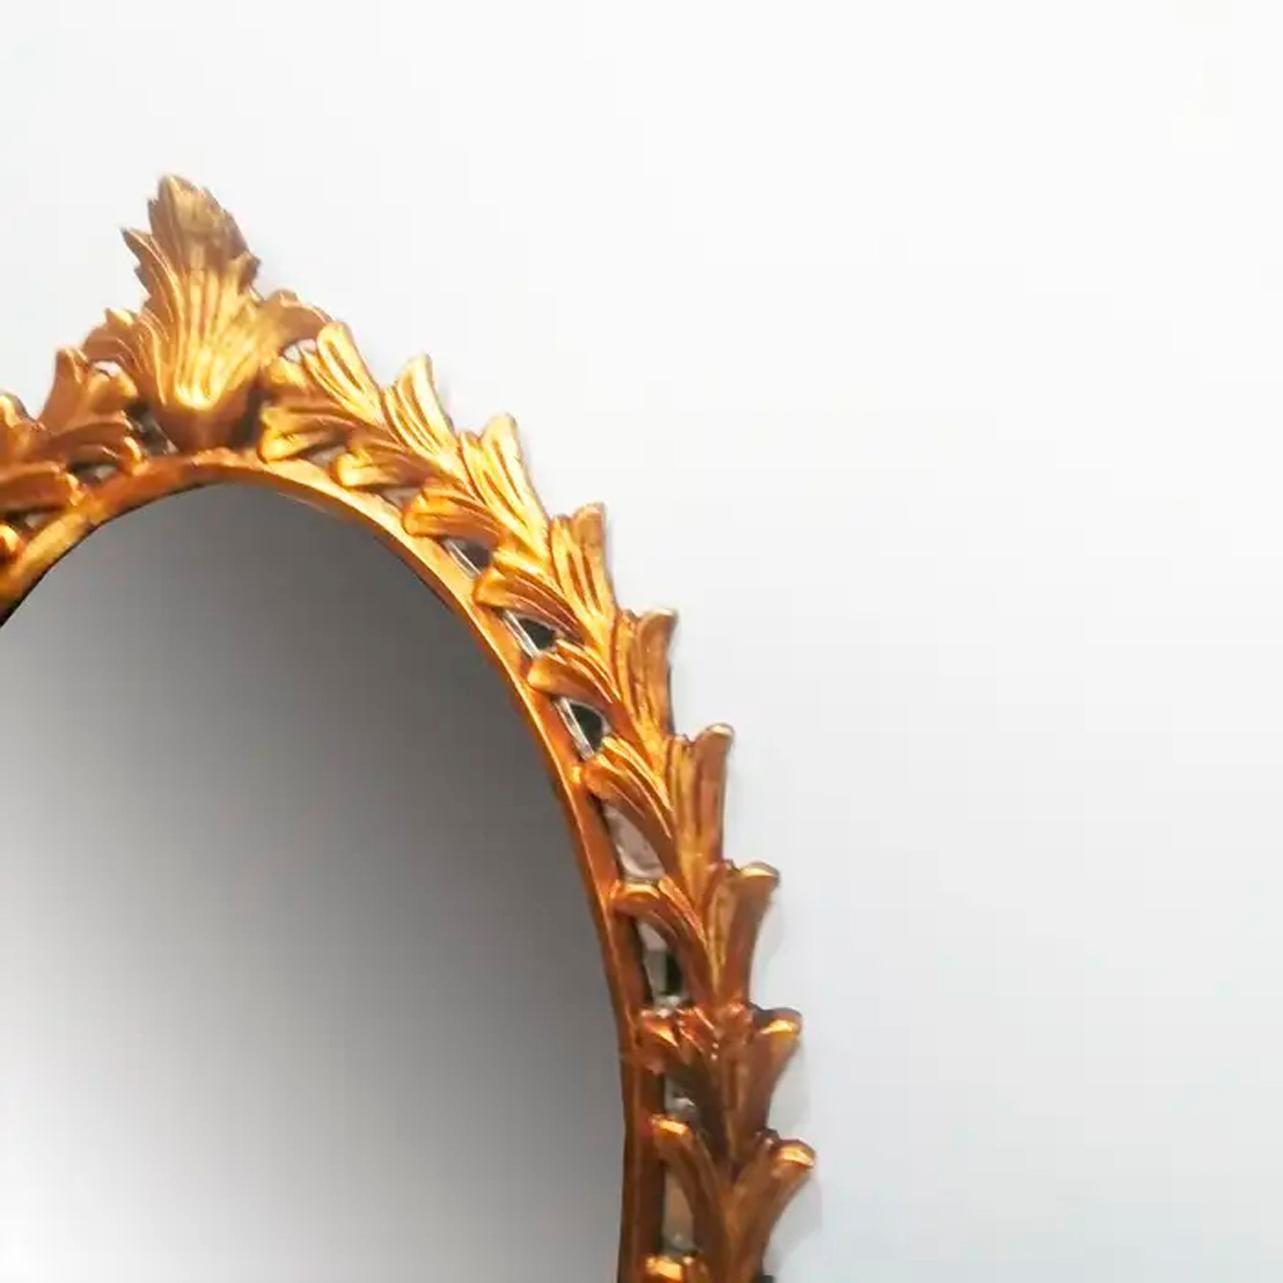 Art Deco Mirror Large Wooden Acanthus Leaves Glod Leaf Mid-20th Century.  Italy For Sale